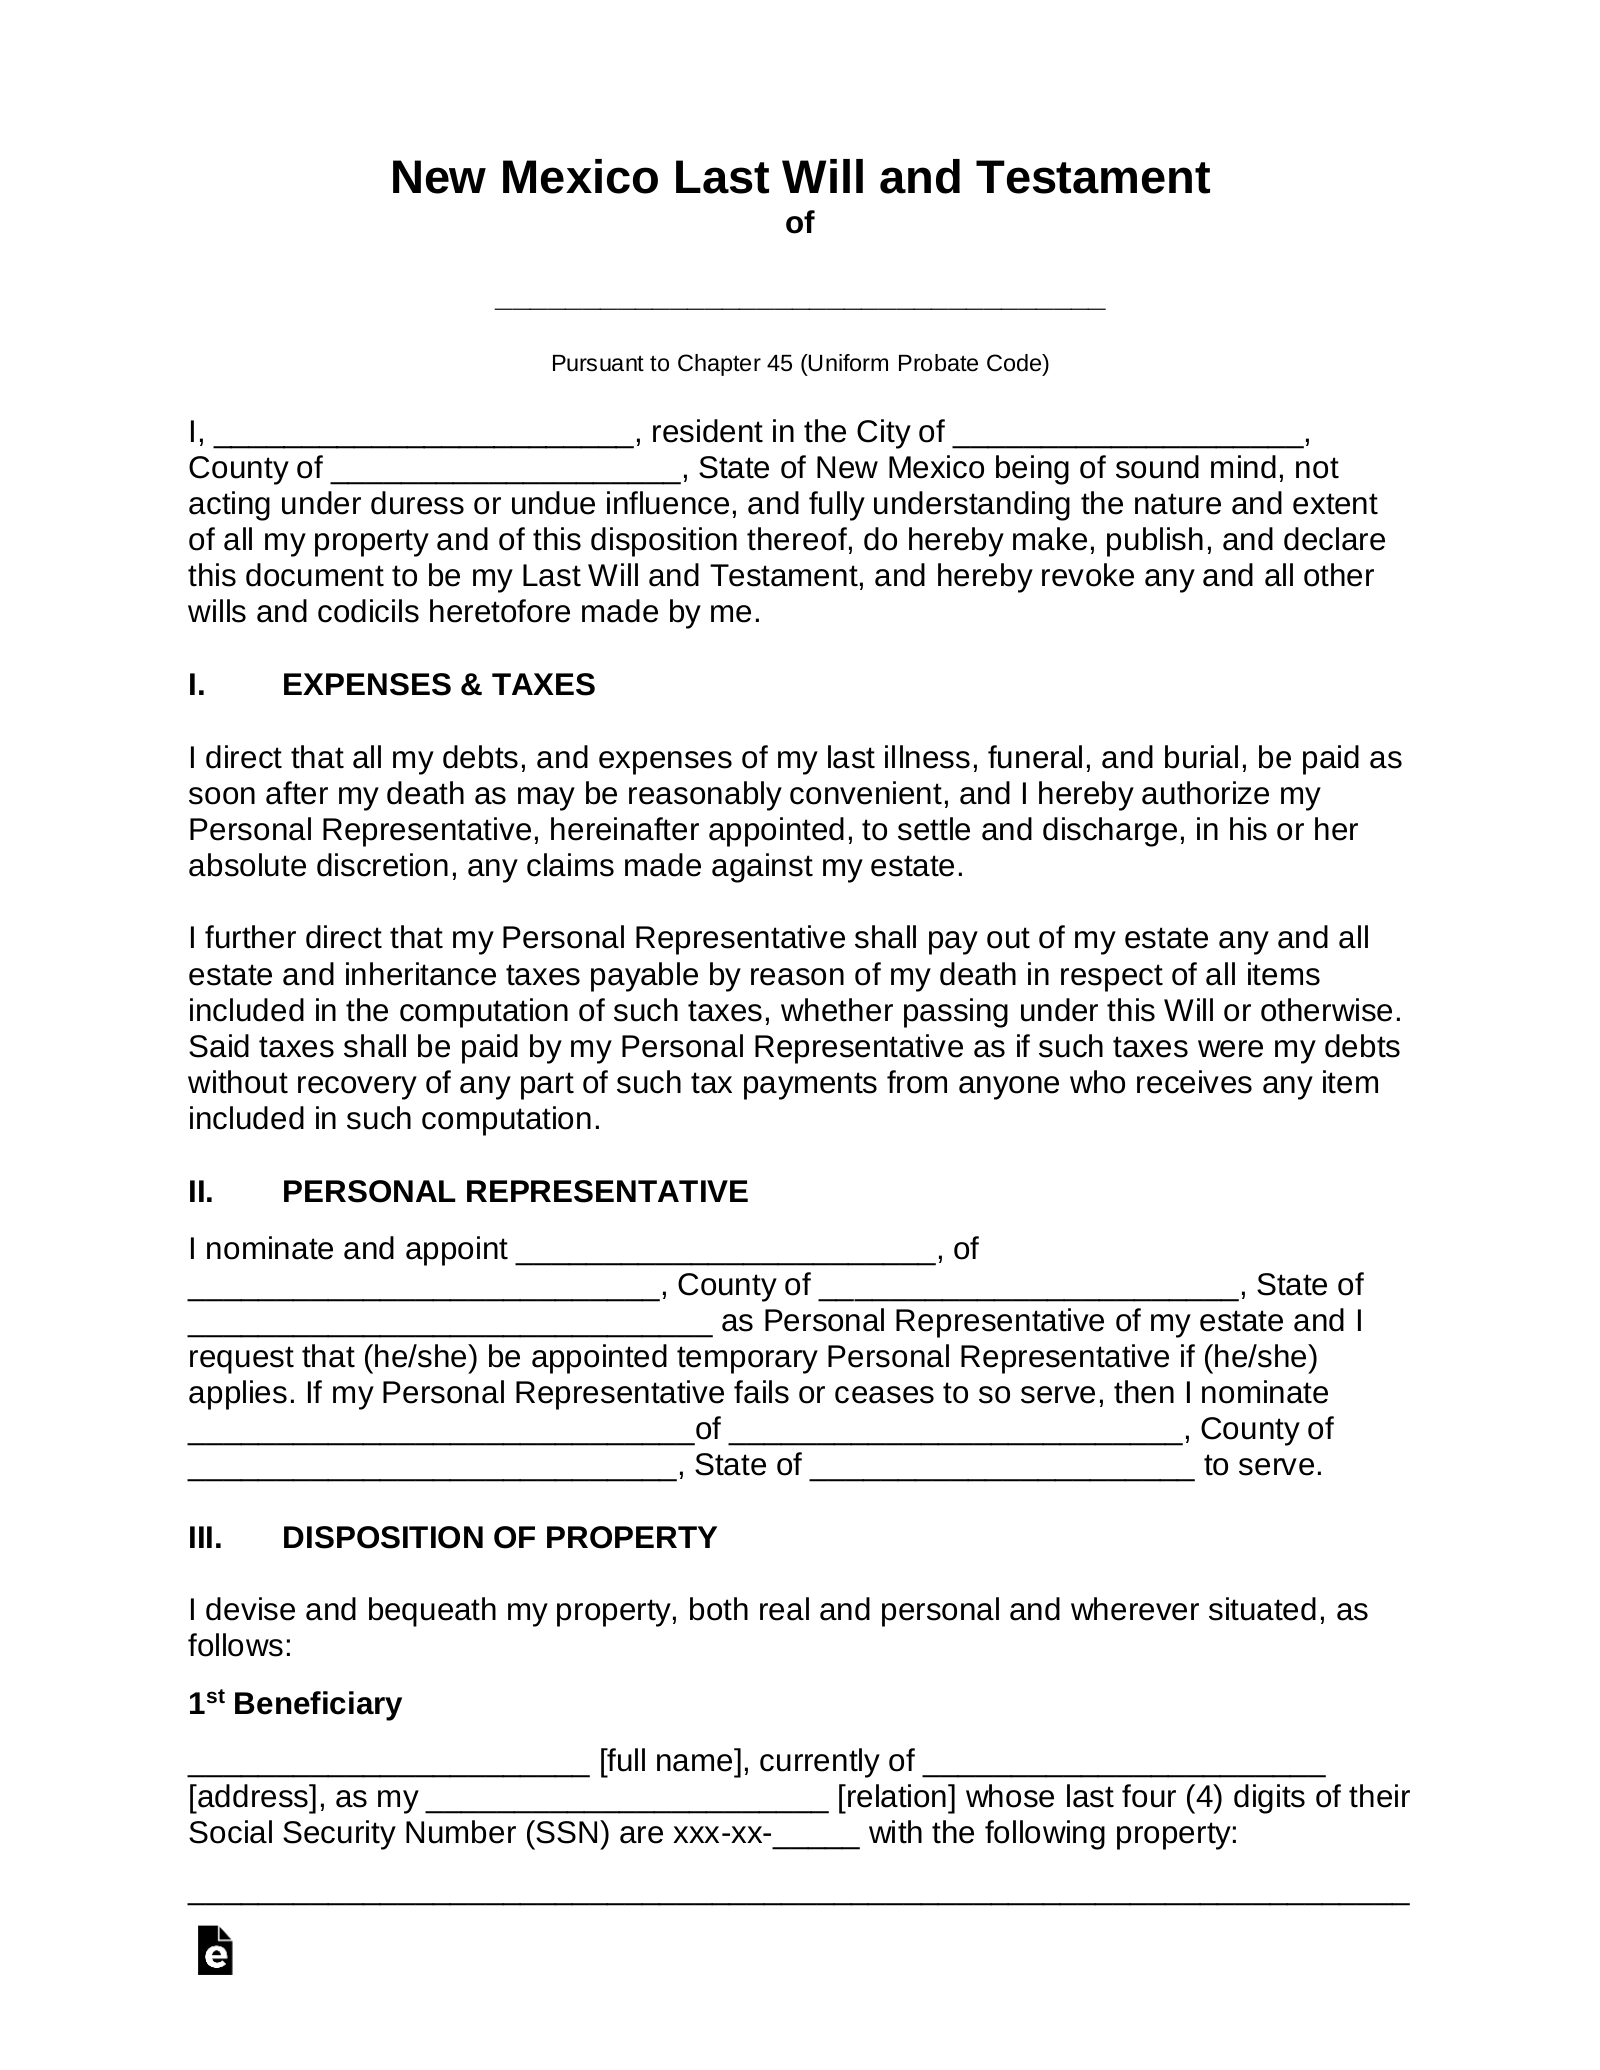 download-new-mexico-last-will-and-testament-form-for-free-page-7-formtemplate